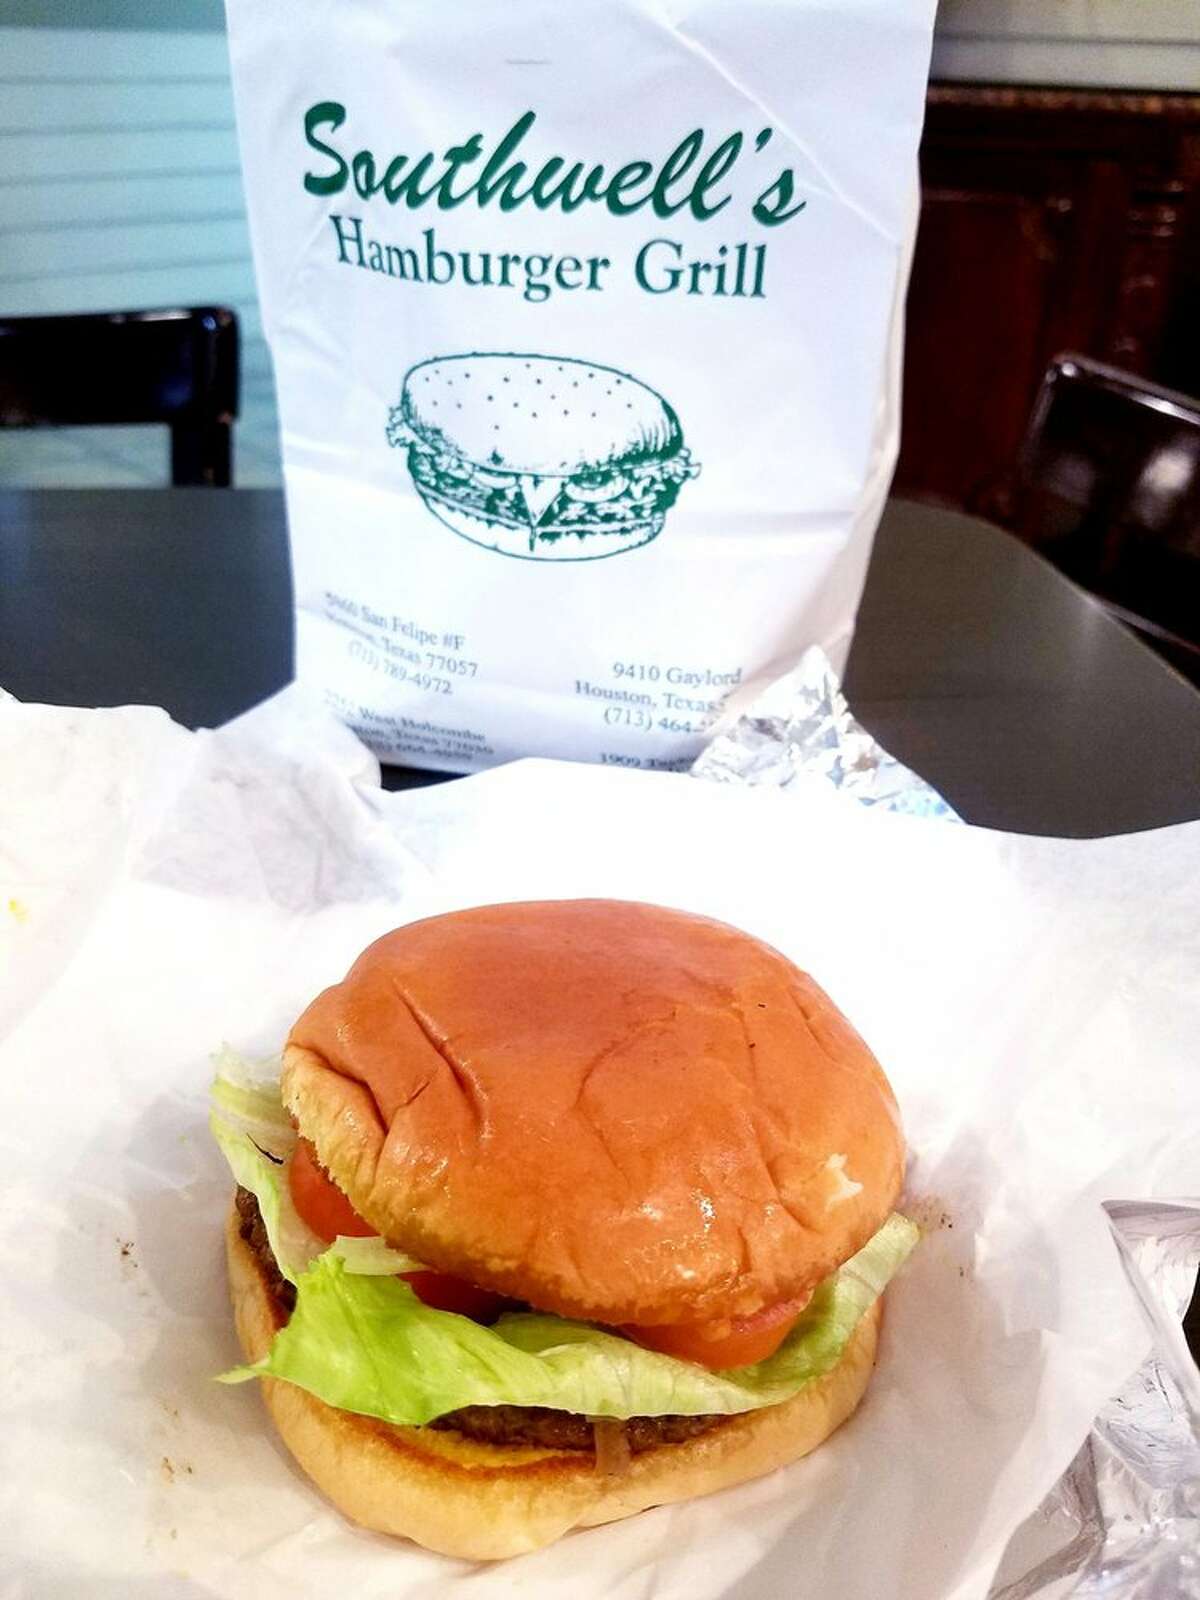 Southwell's Hamburger Grill is a classic Houston go-to for burgers.